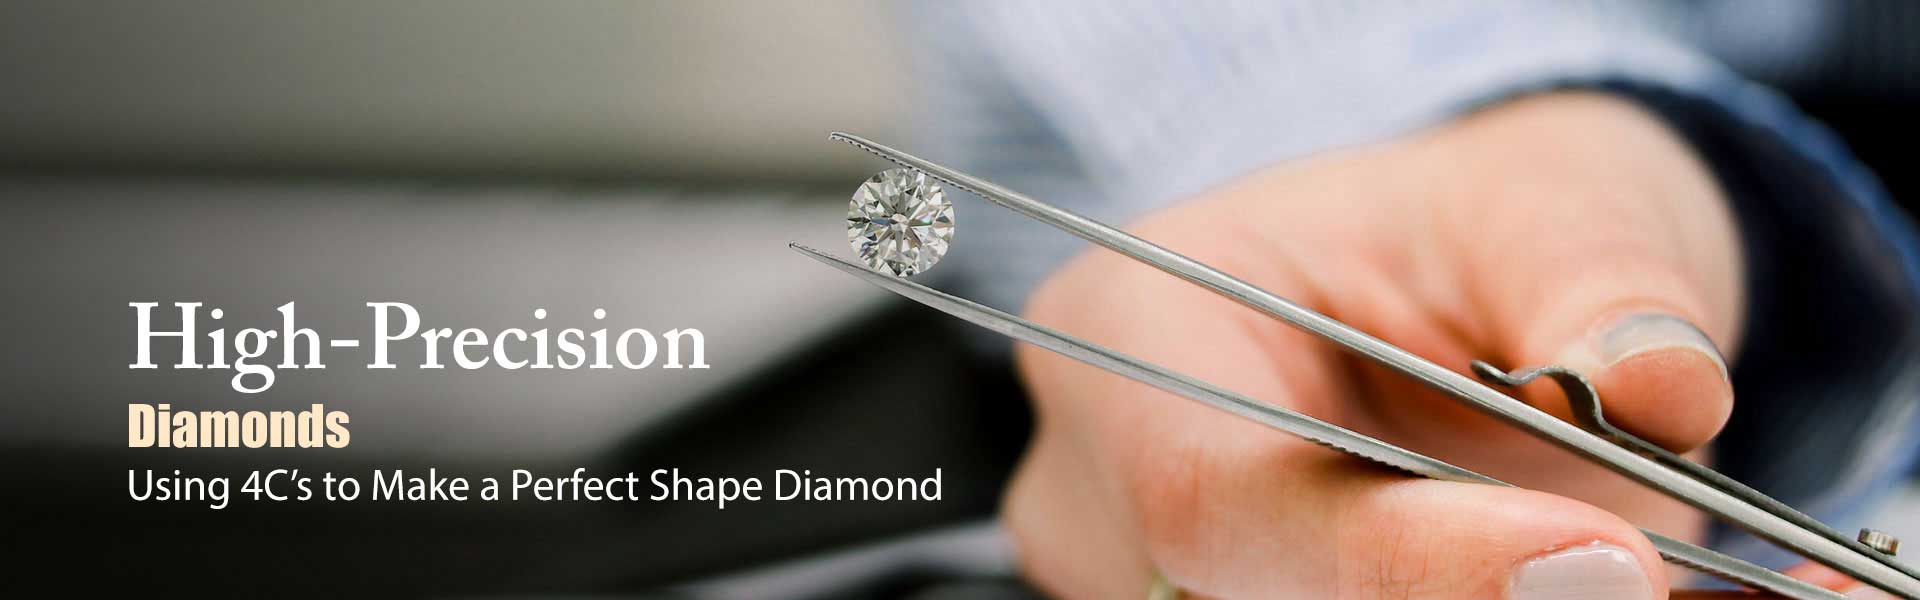  Certified Diamond  Manufacturers in South Africa